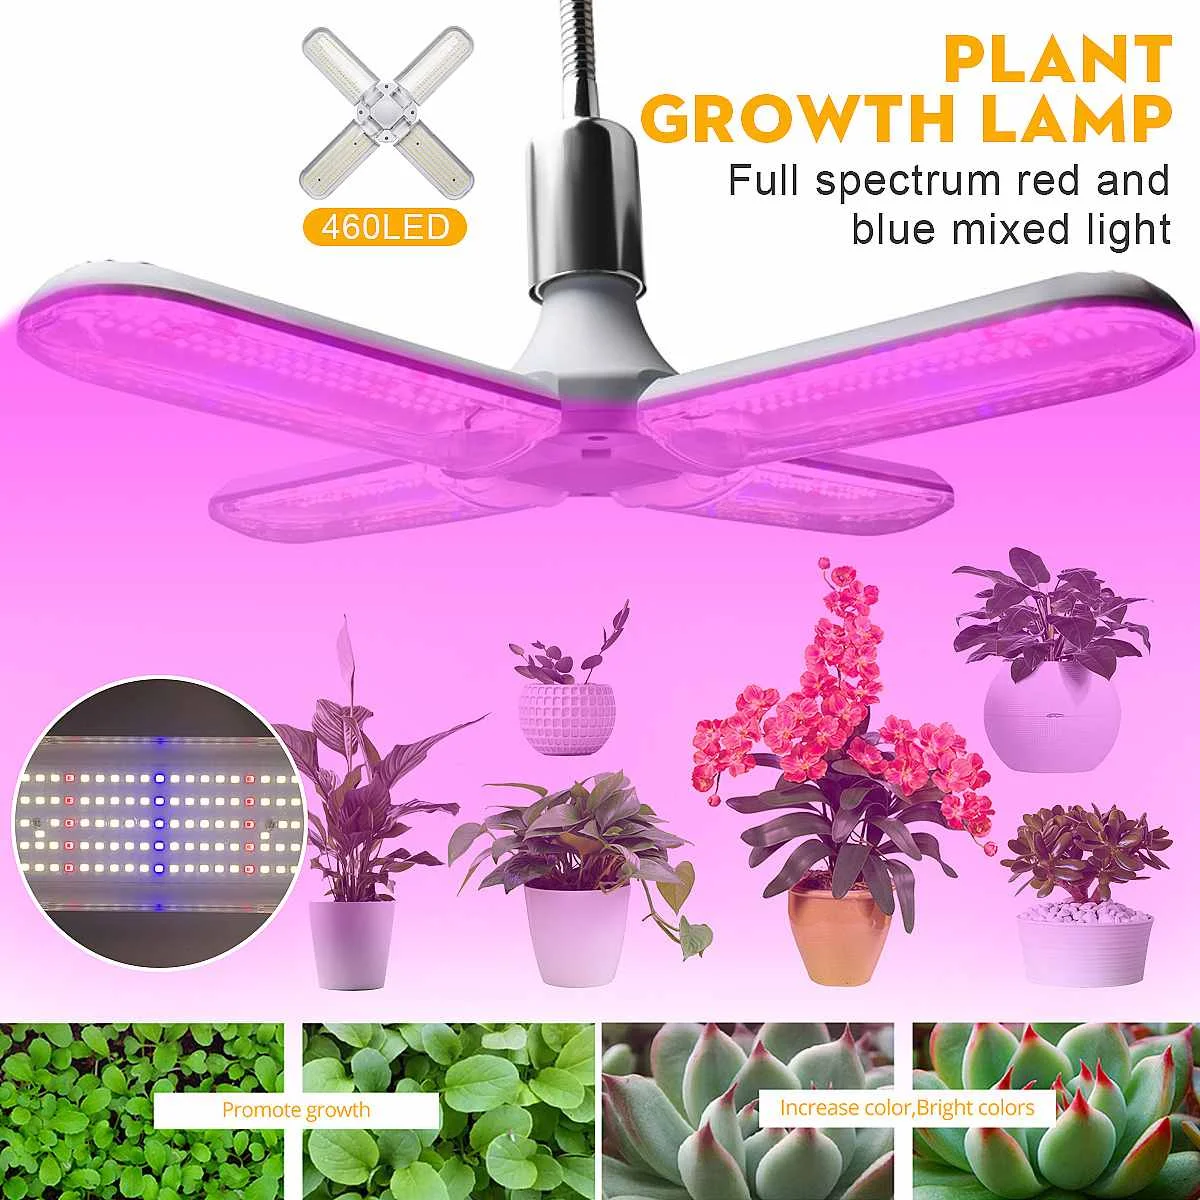 

Full Spectrum 150W LED Grow Light Plant Lights E27 Bulb Phytolamp Red Blue Warm White For Indoor Greenhouse Vegs Seed